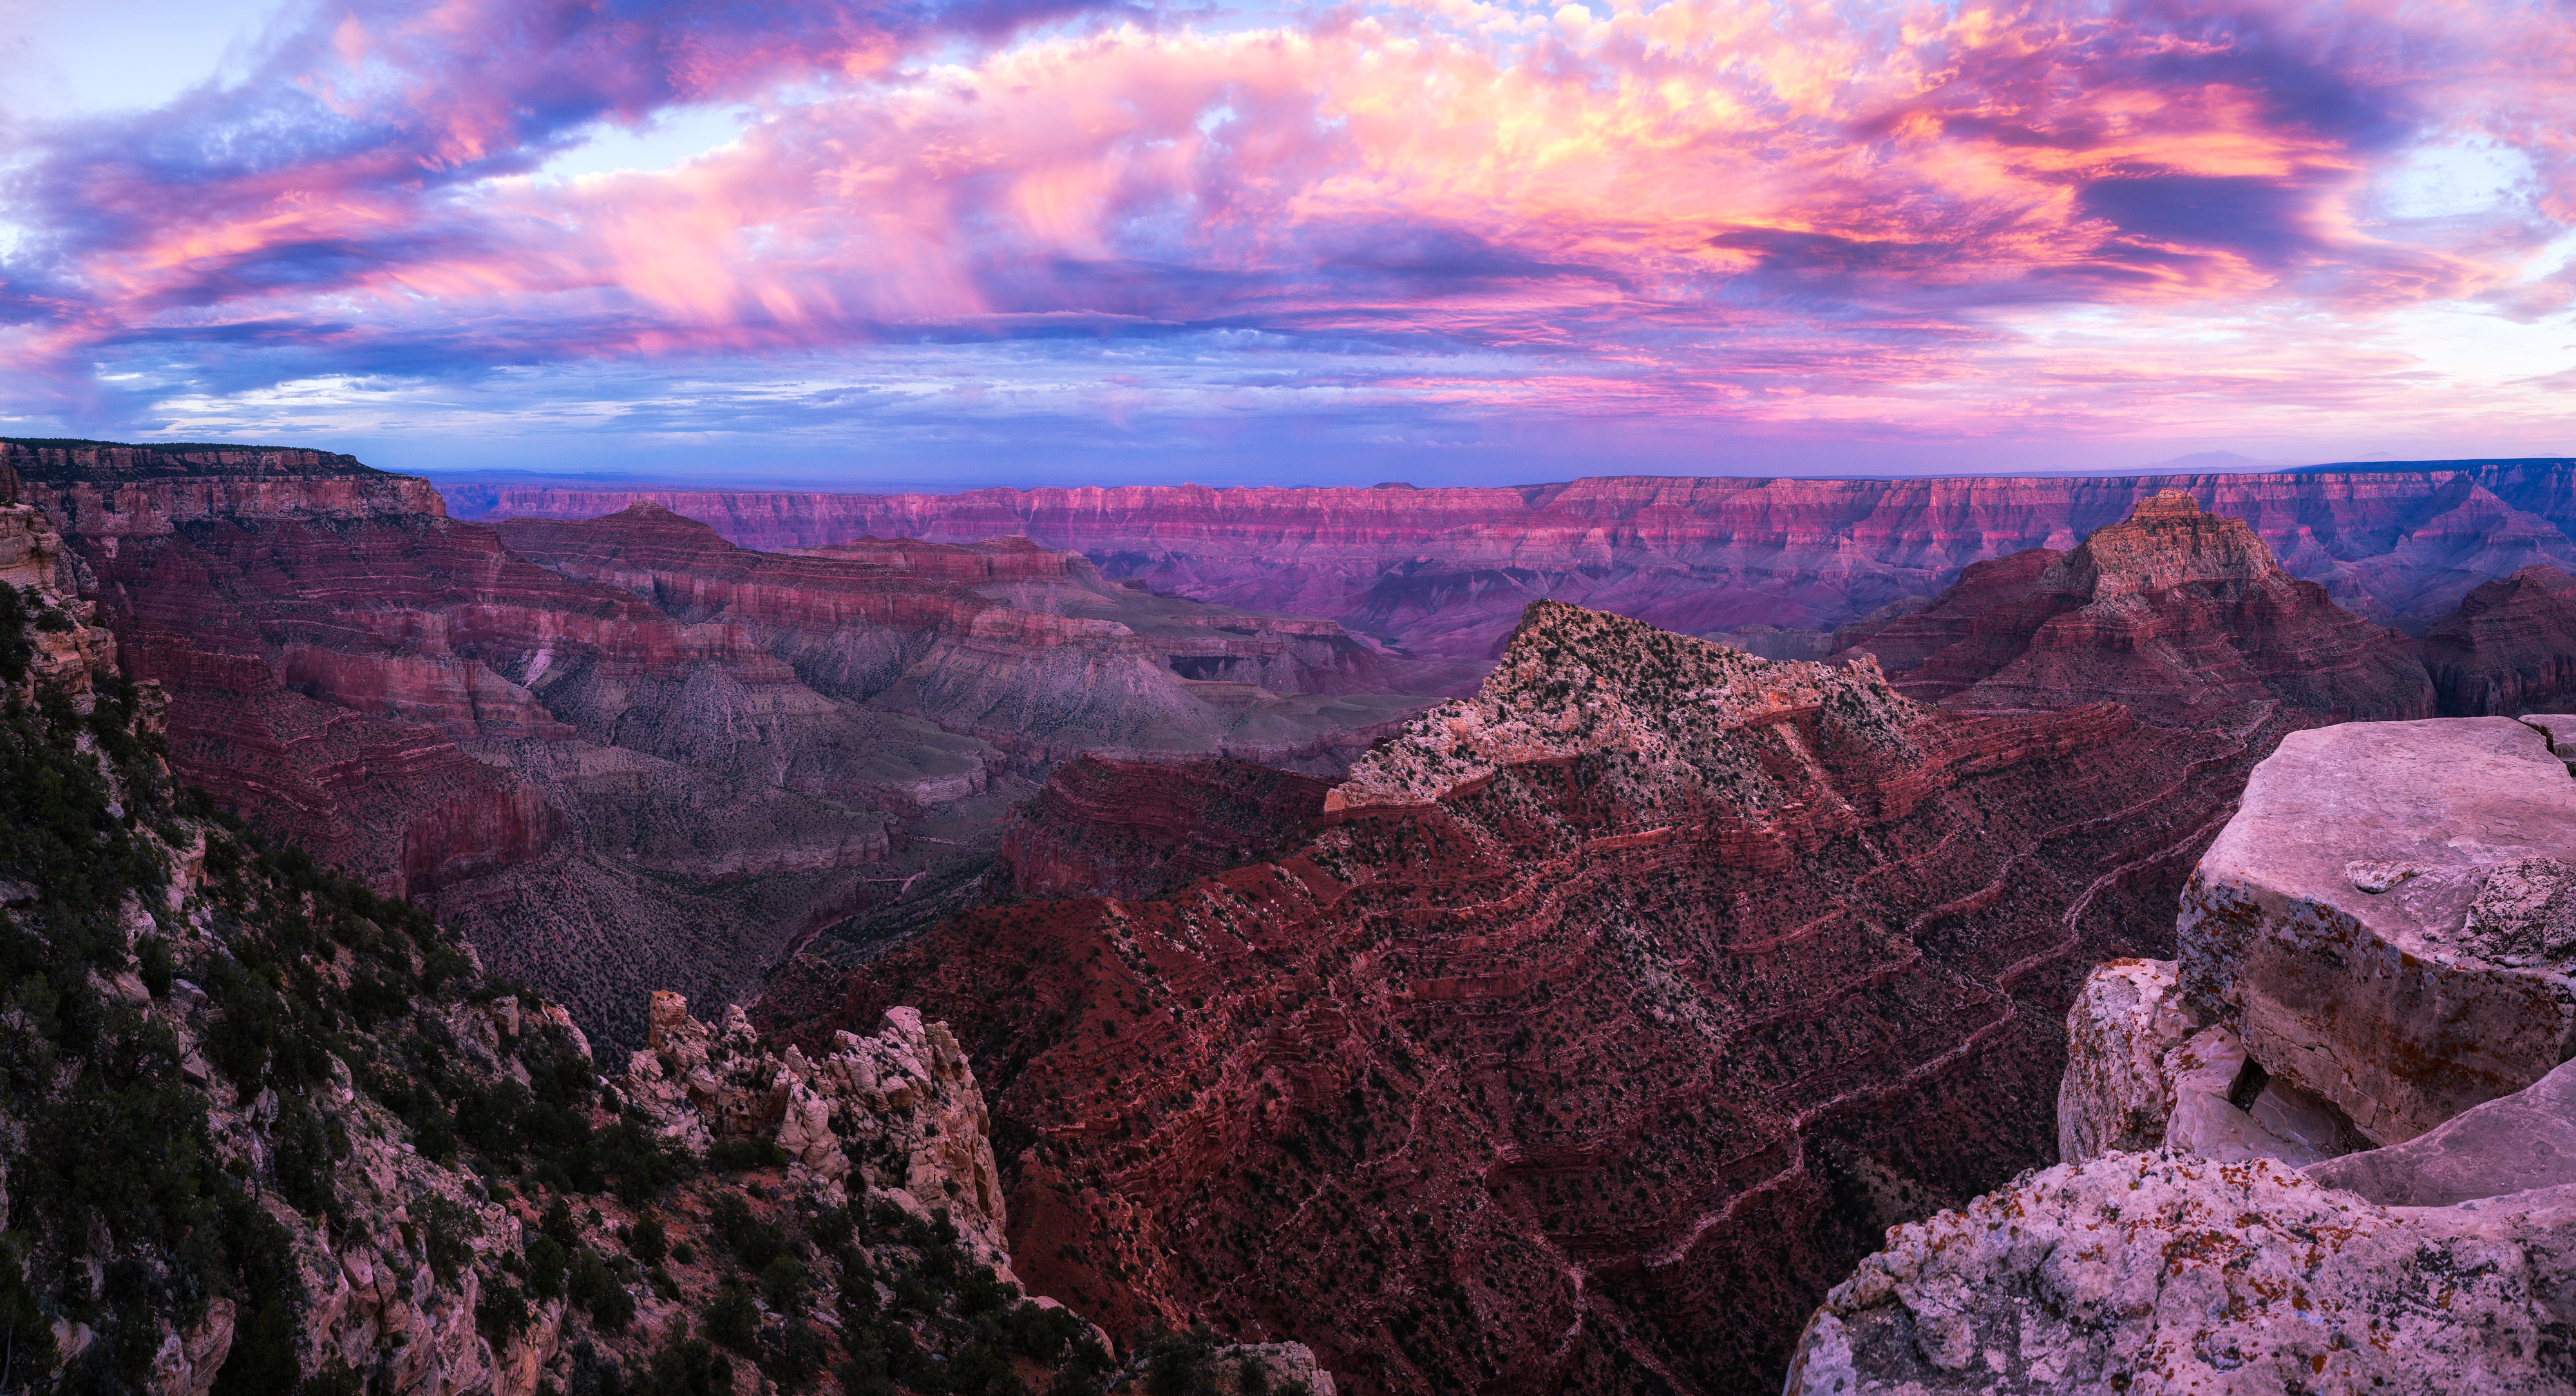 Wallpapers canyon sunset nature on the desktop